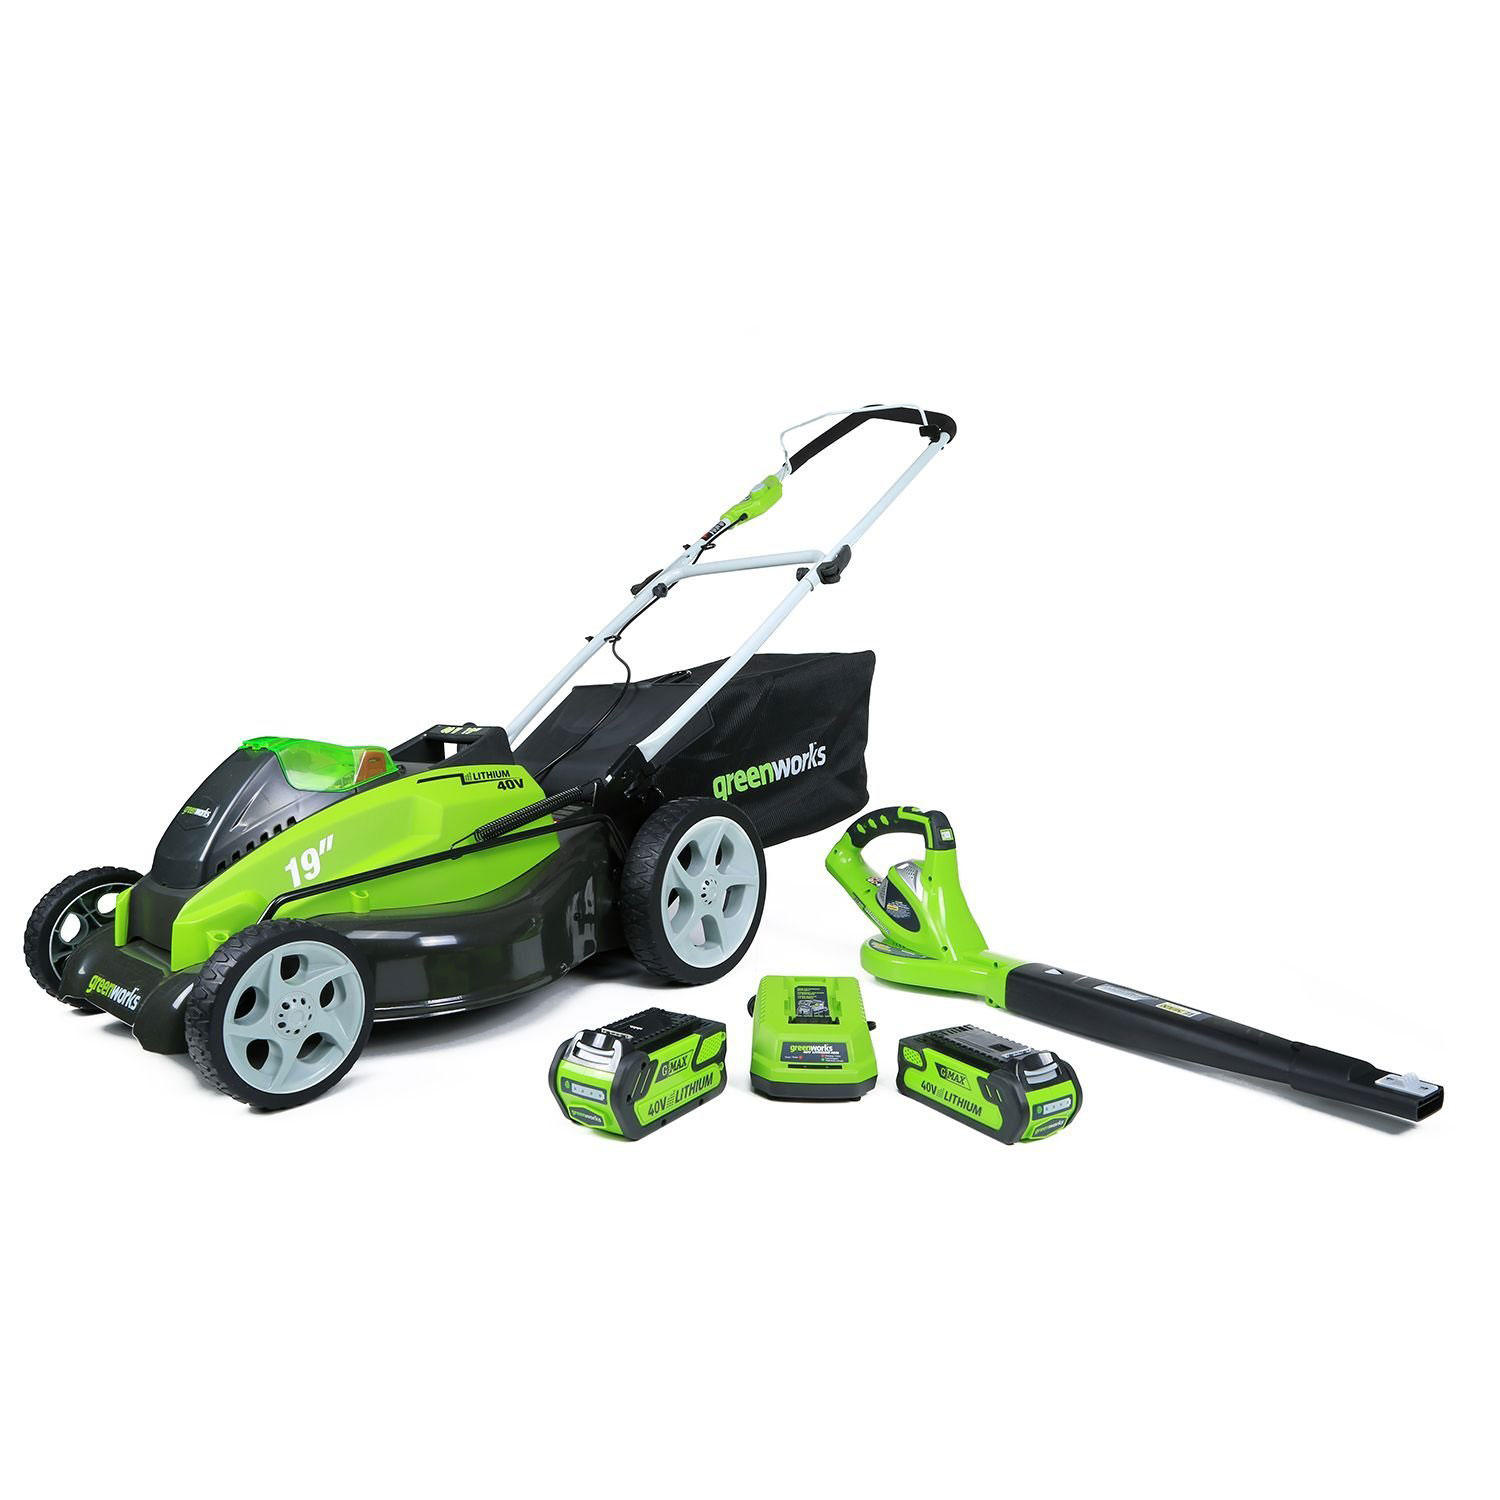 GreenWorks G-MAX 40V 19 inch Lawn Mower and Blower Combo Lawn Kit